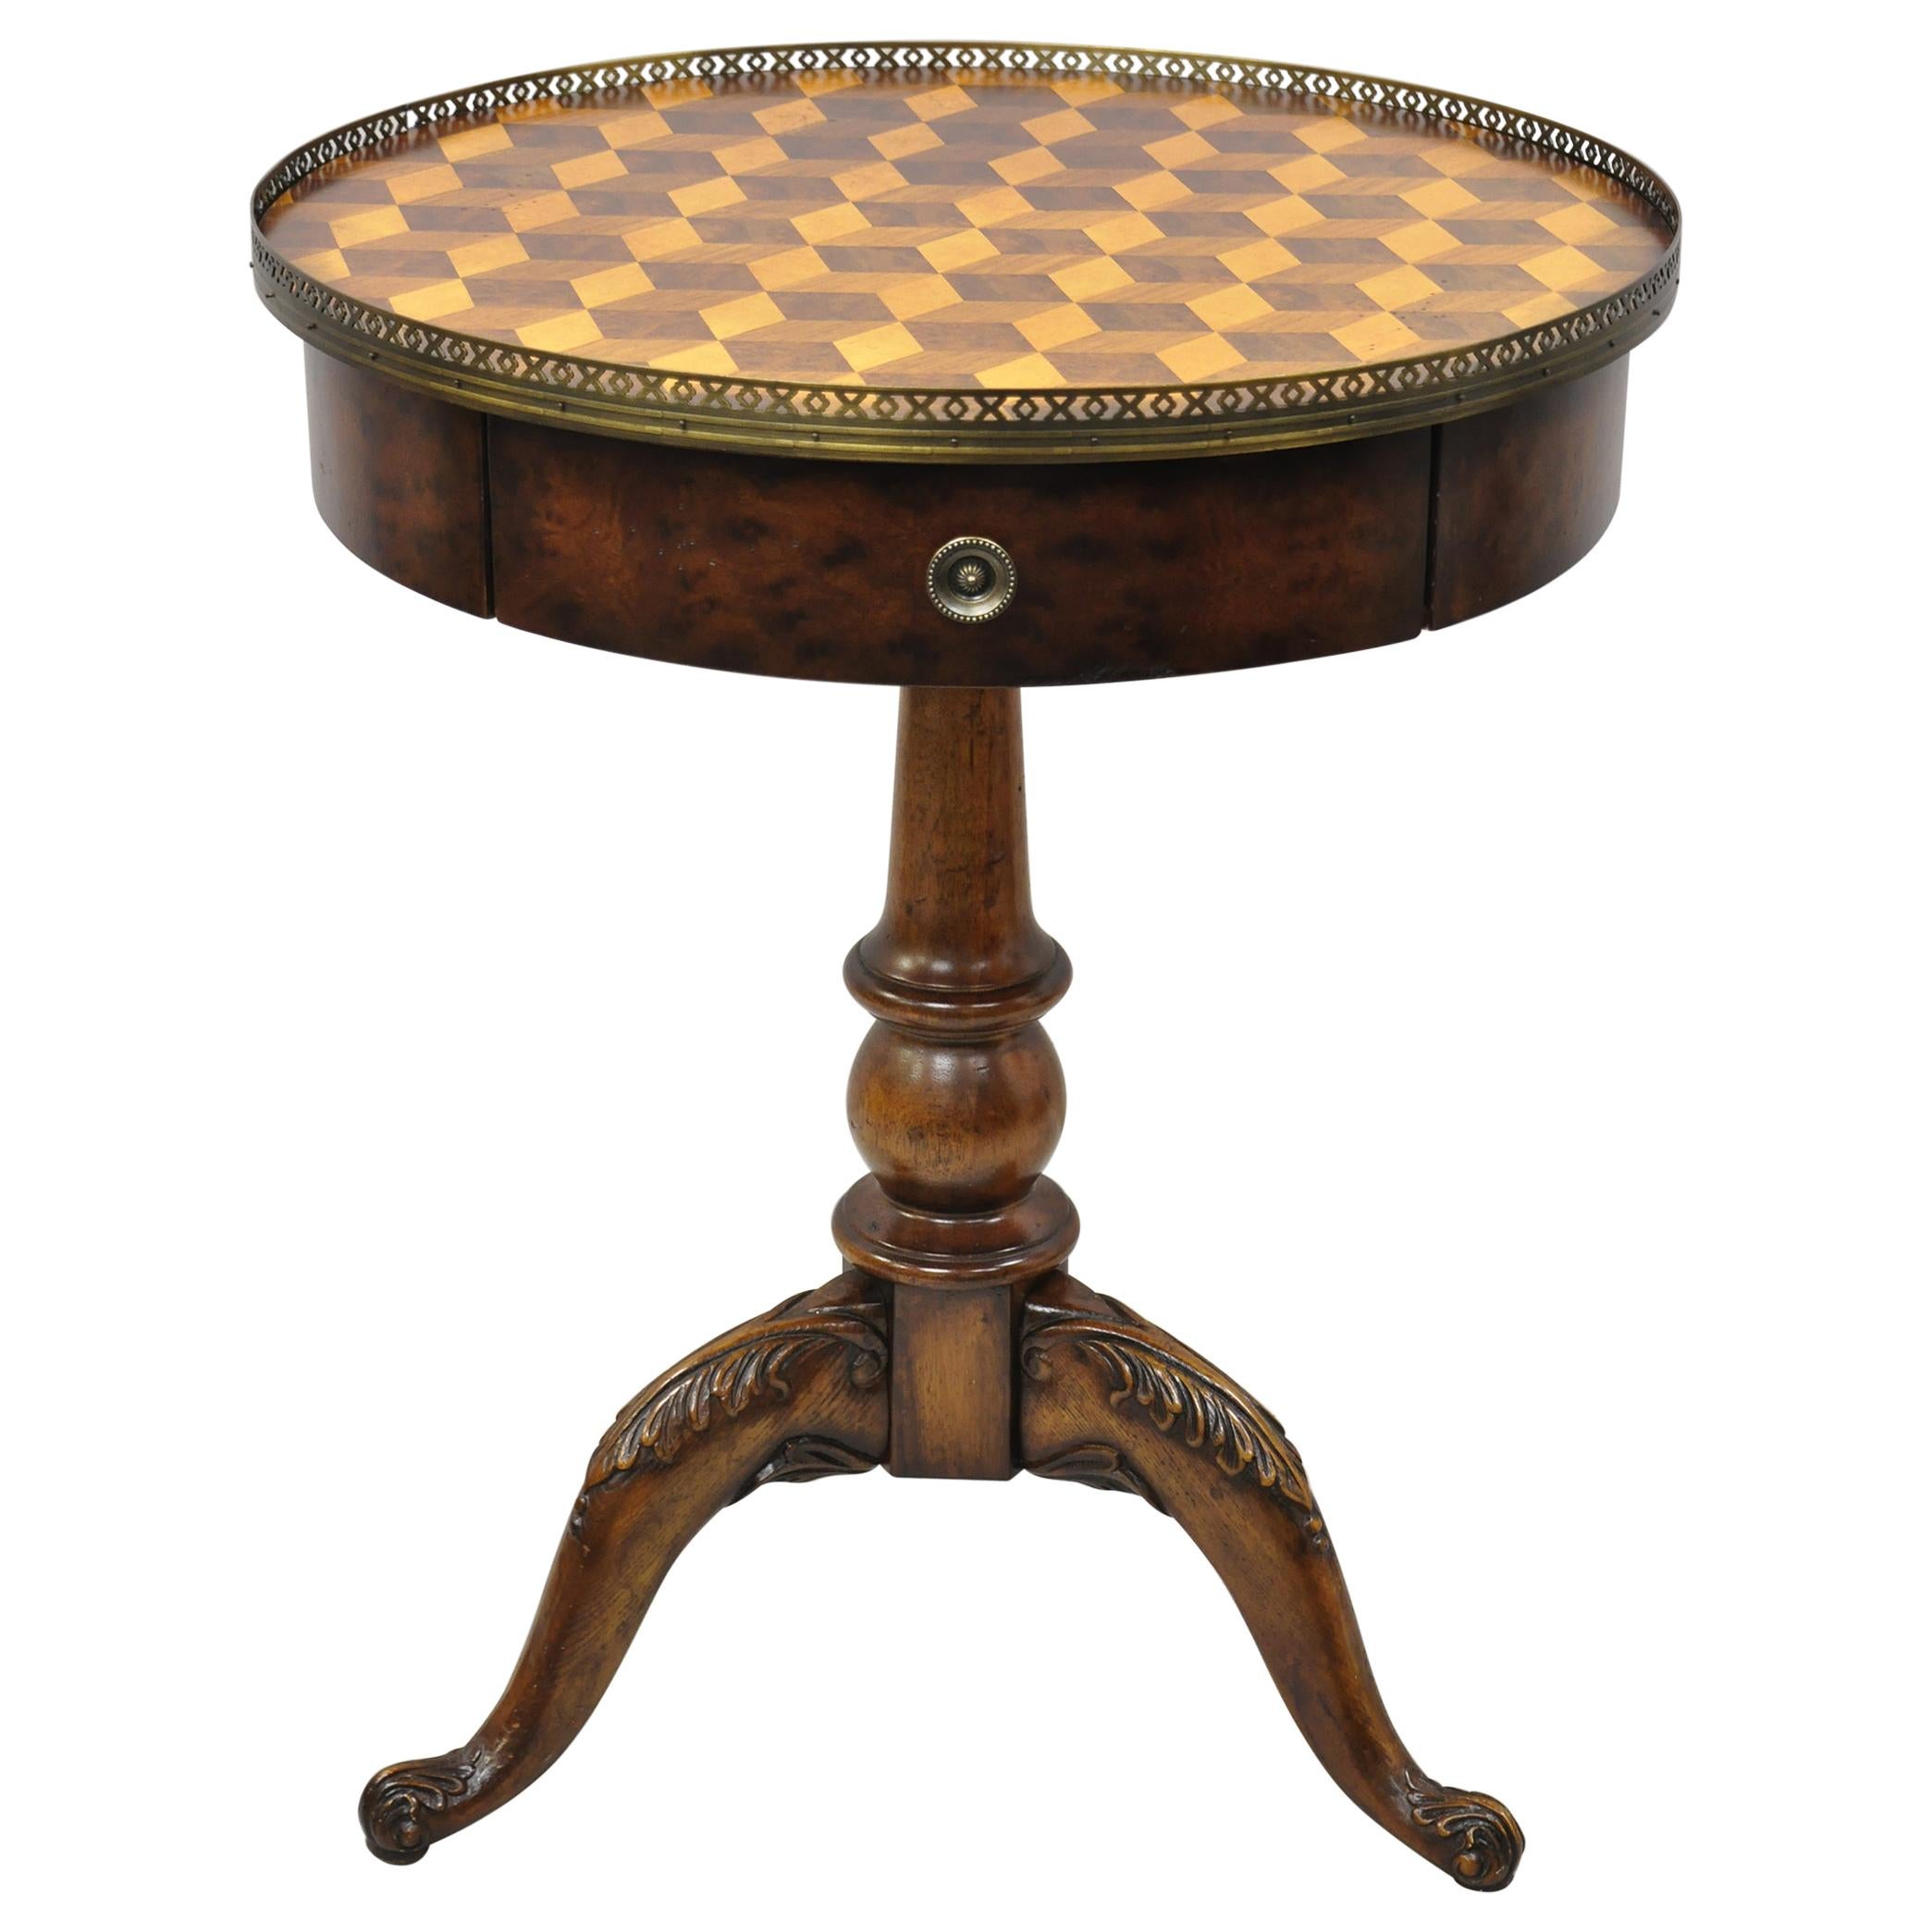 Marquetry Geometric Inlay Regency Style Round Lamp Side Drum Table